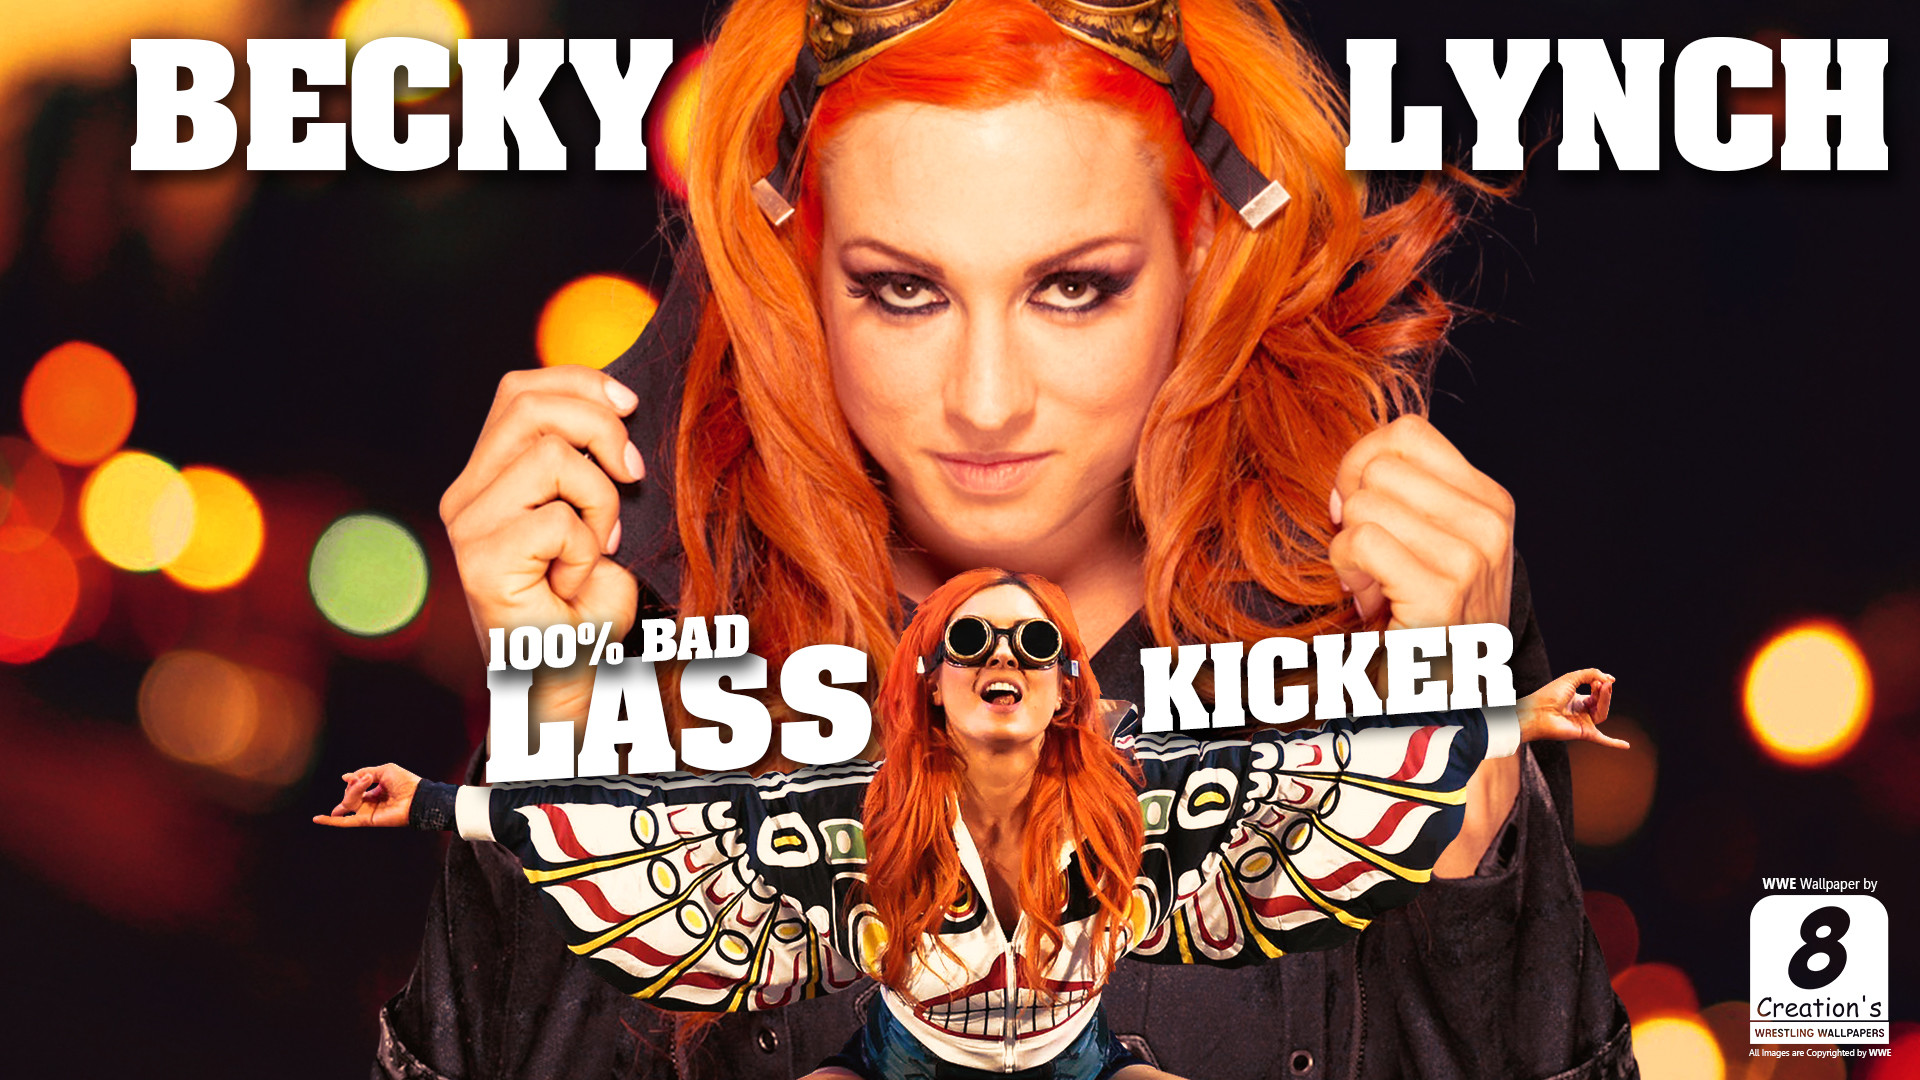 Download Becky Lynch Profile Poster Wallpaper | Wallpapers.com